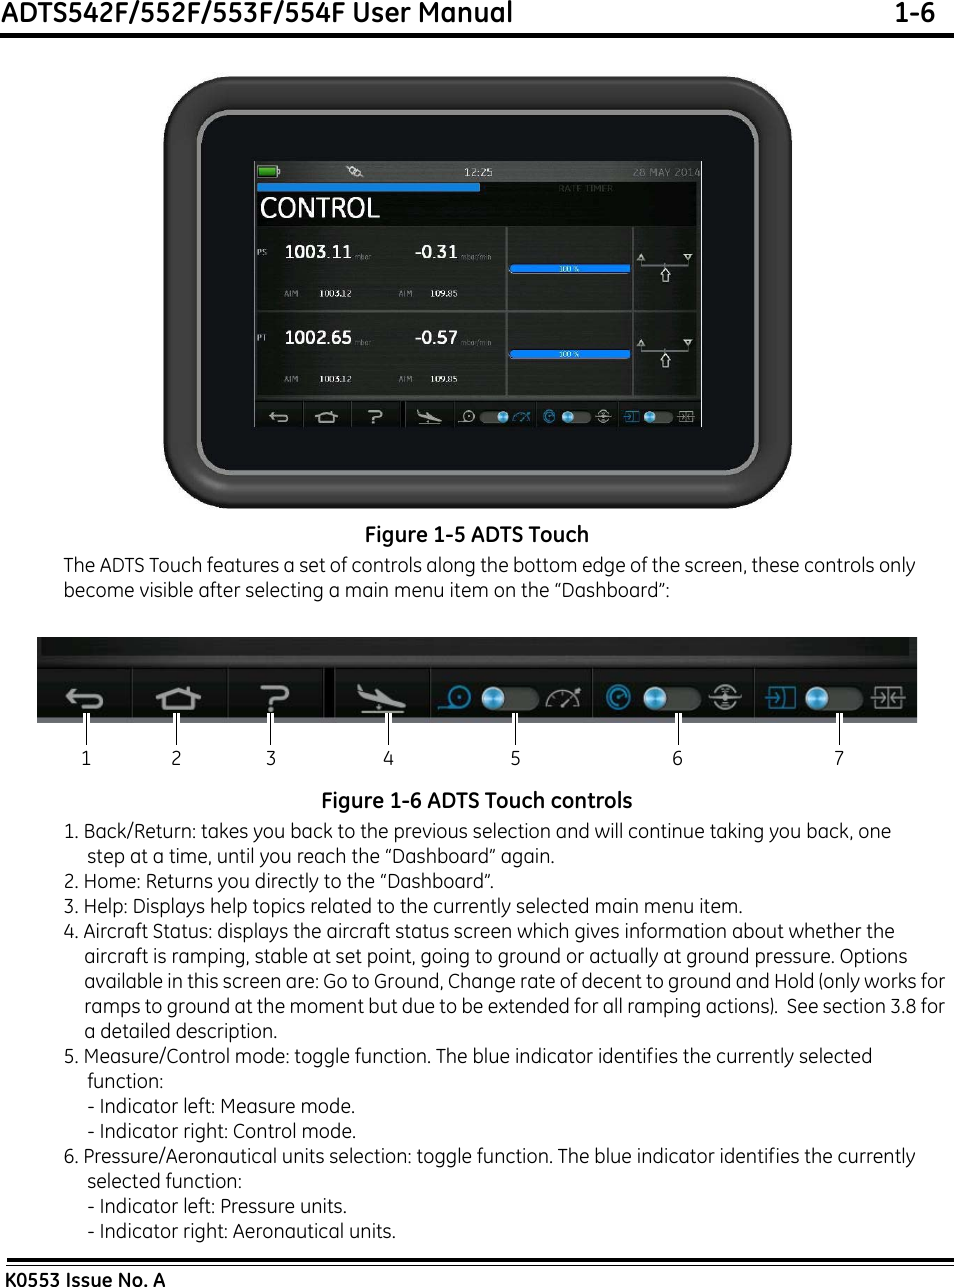 ADTS542F/552F/553F/554F User Manual  1-6K0553 Issue No. AFigure 1-5 ADTS TouchThe ADTS Touch features a set of controls along the bottom edge of the screen, these controls only become visible after selecting a main menu item on the “Dashboard”:Figure 1-6 ADTS Touch controls1. Back/Return: takes you back to the previous selection and will continue taking you back, one step at a time, until you reach the “Dashboard” again.2. Home: Returns you directly to the “Dashboard”.3. Help: Displays help topics related to the currently selected main menu item.4. Aircraft Status: displays the aircraft status screen which gives information about whether the aircraft is ramping, stable at set point, going to ground or actually at ground pressure. Options available in this screen are: Go to Ground, Change rate of decent to ground and Hold (only works for ramps to ground at the moment but due to be extended for all ramping actions).  See section 3.8 for a detailed description.5. Measure/Control mode: toggle function. The blue indicator identifies the currently selected  function:- Indicator left: Measure mode.- Indicator right: Control mode.6. Pressure/Aeronautical units selection: toggle function. The blue indicator identifies the currently selected function:- Indicator left: Pressure units.- Indicator right: Aeronautical units.12 3 4 5 6 7